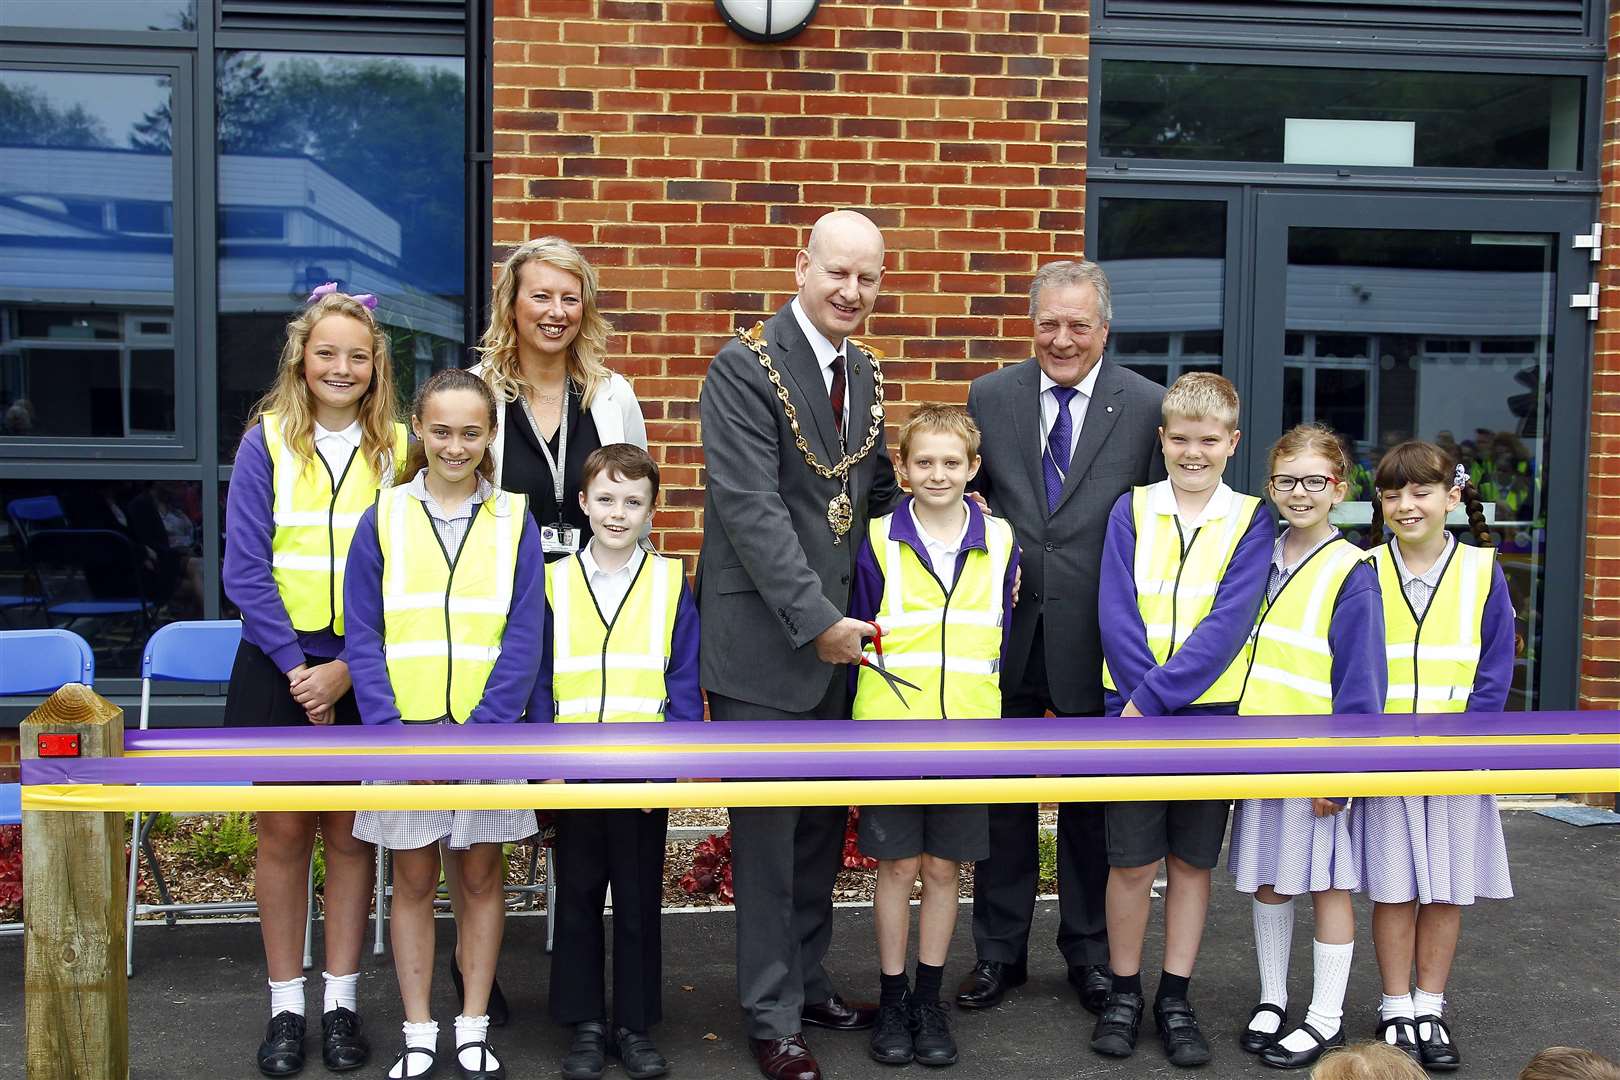 Cllr Dave Naghi, the Mayor of Maidstone, cuts the tape accompanied by Jack Keeler, chairman of governors, and Sarah Symonds, head teacher, and some of the children